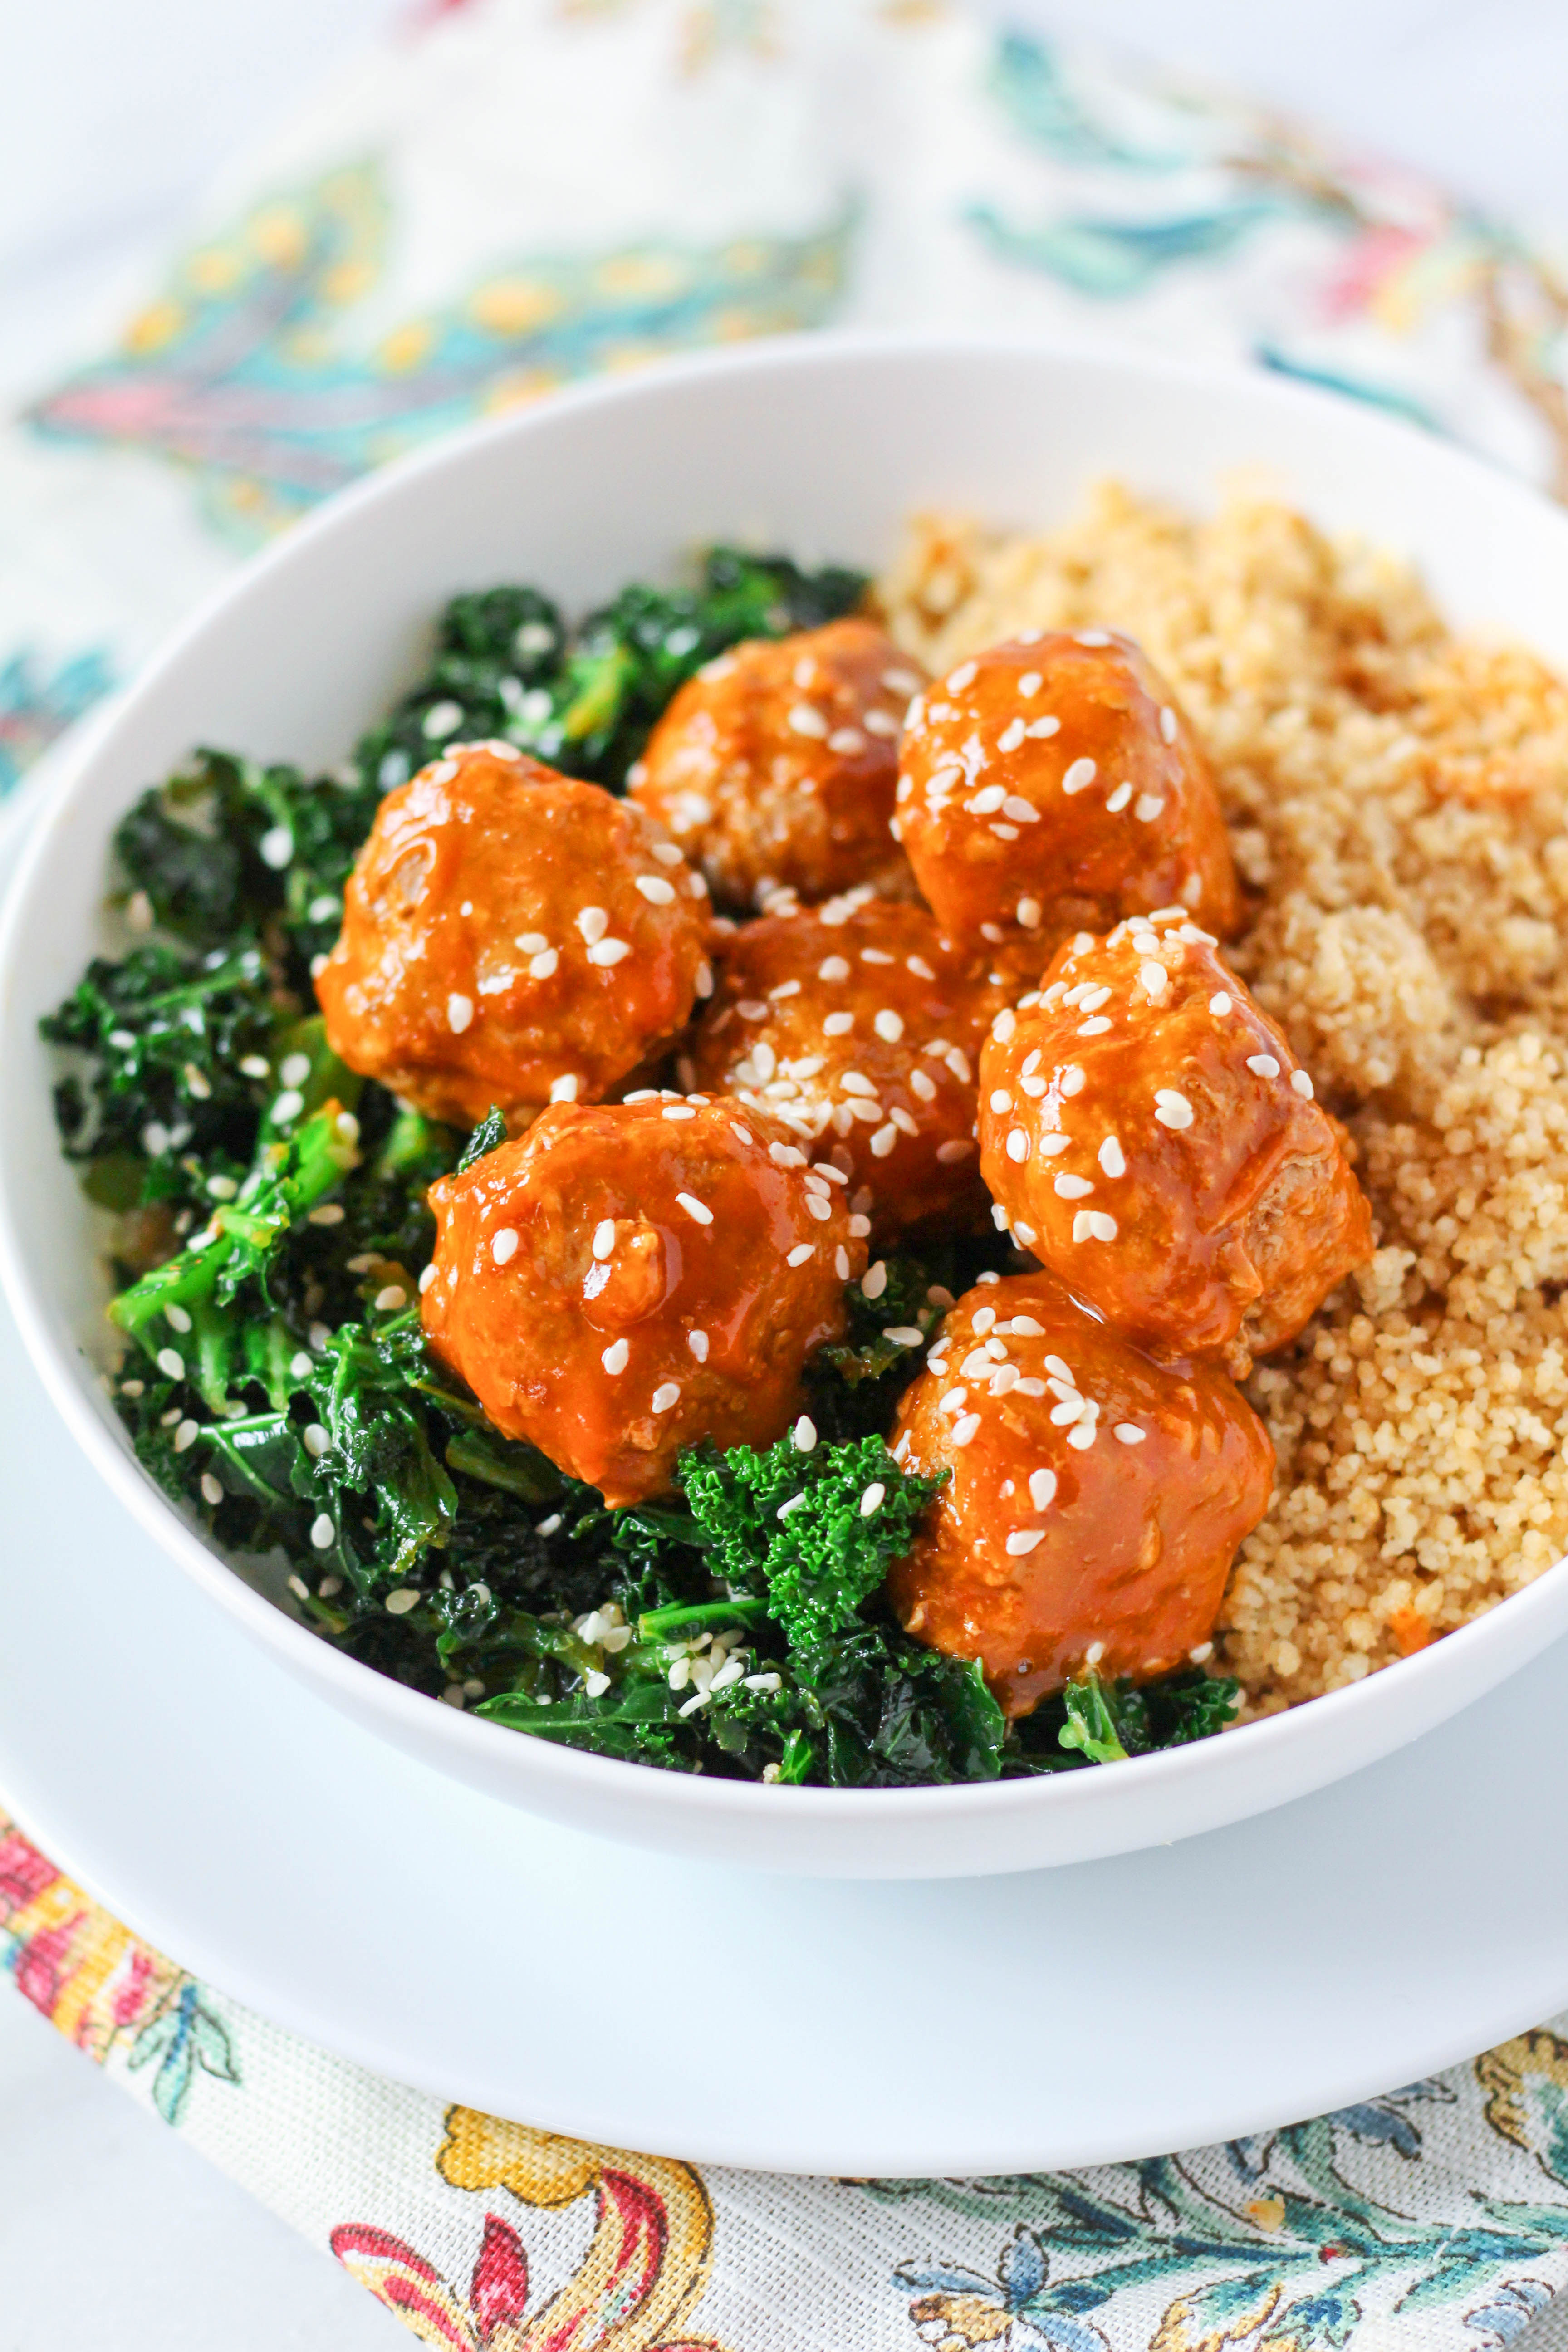 Sweet & Sour Turkey Meatballs with Sesame Kale and Couscous